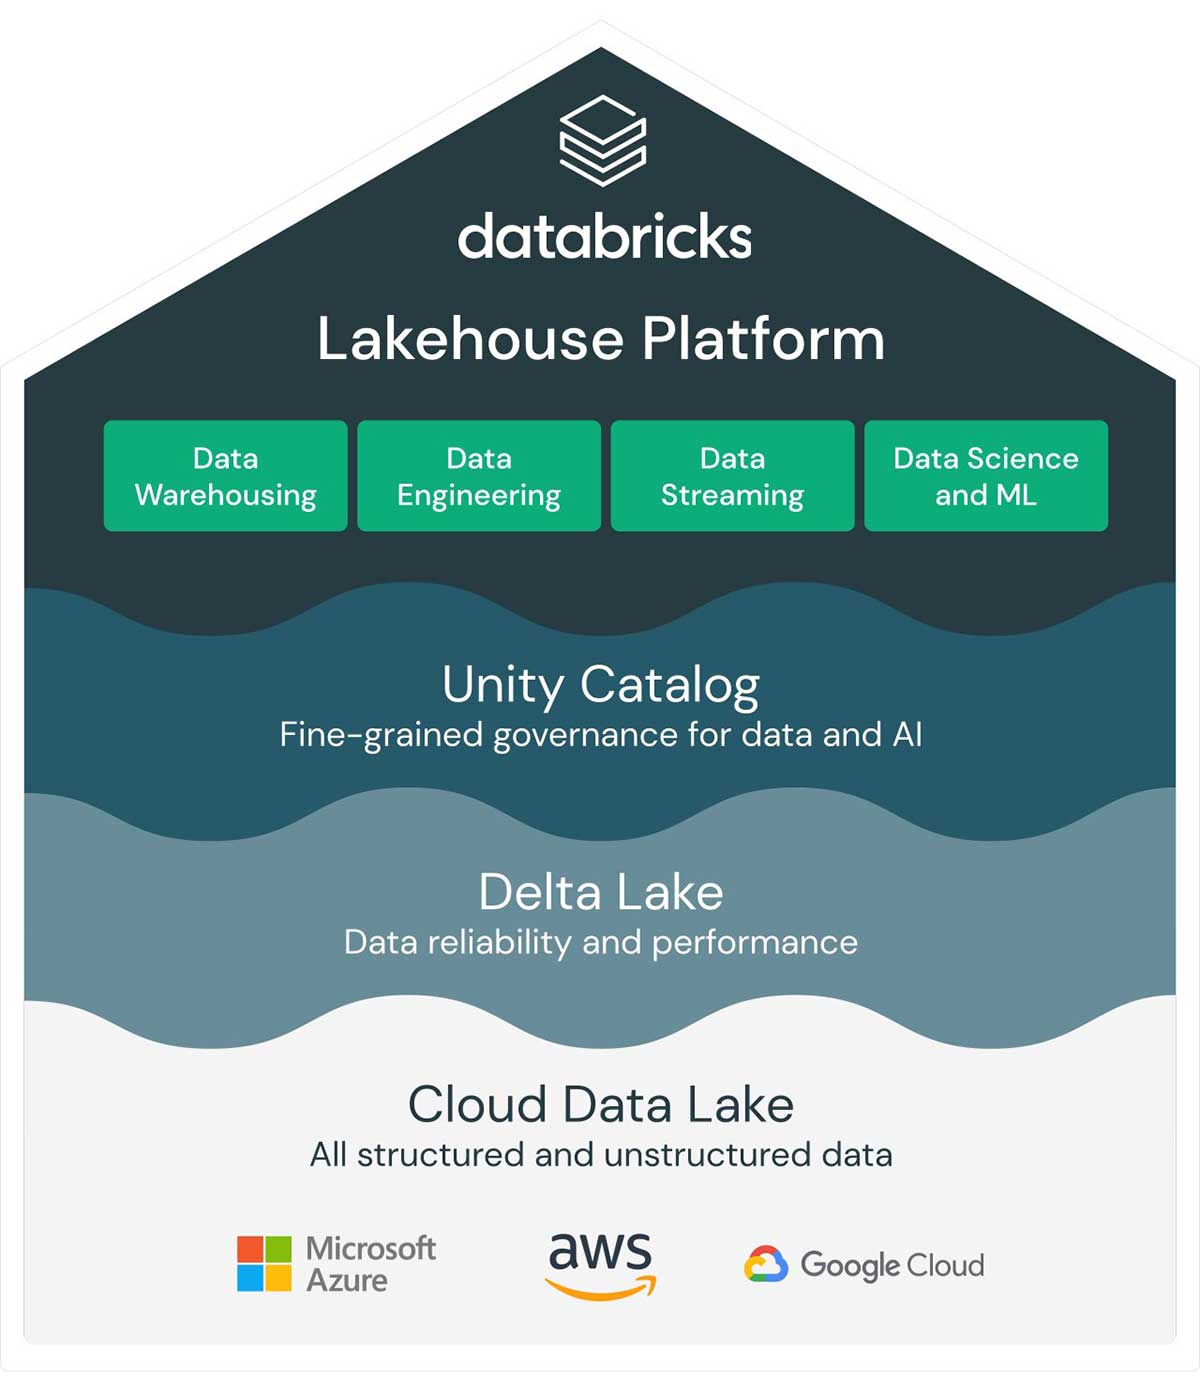 The Databricks Lakehouse Platform facilitates the creation of a strong data culture with organization-wide buy-in and a unified data strategy and shared data language.